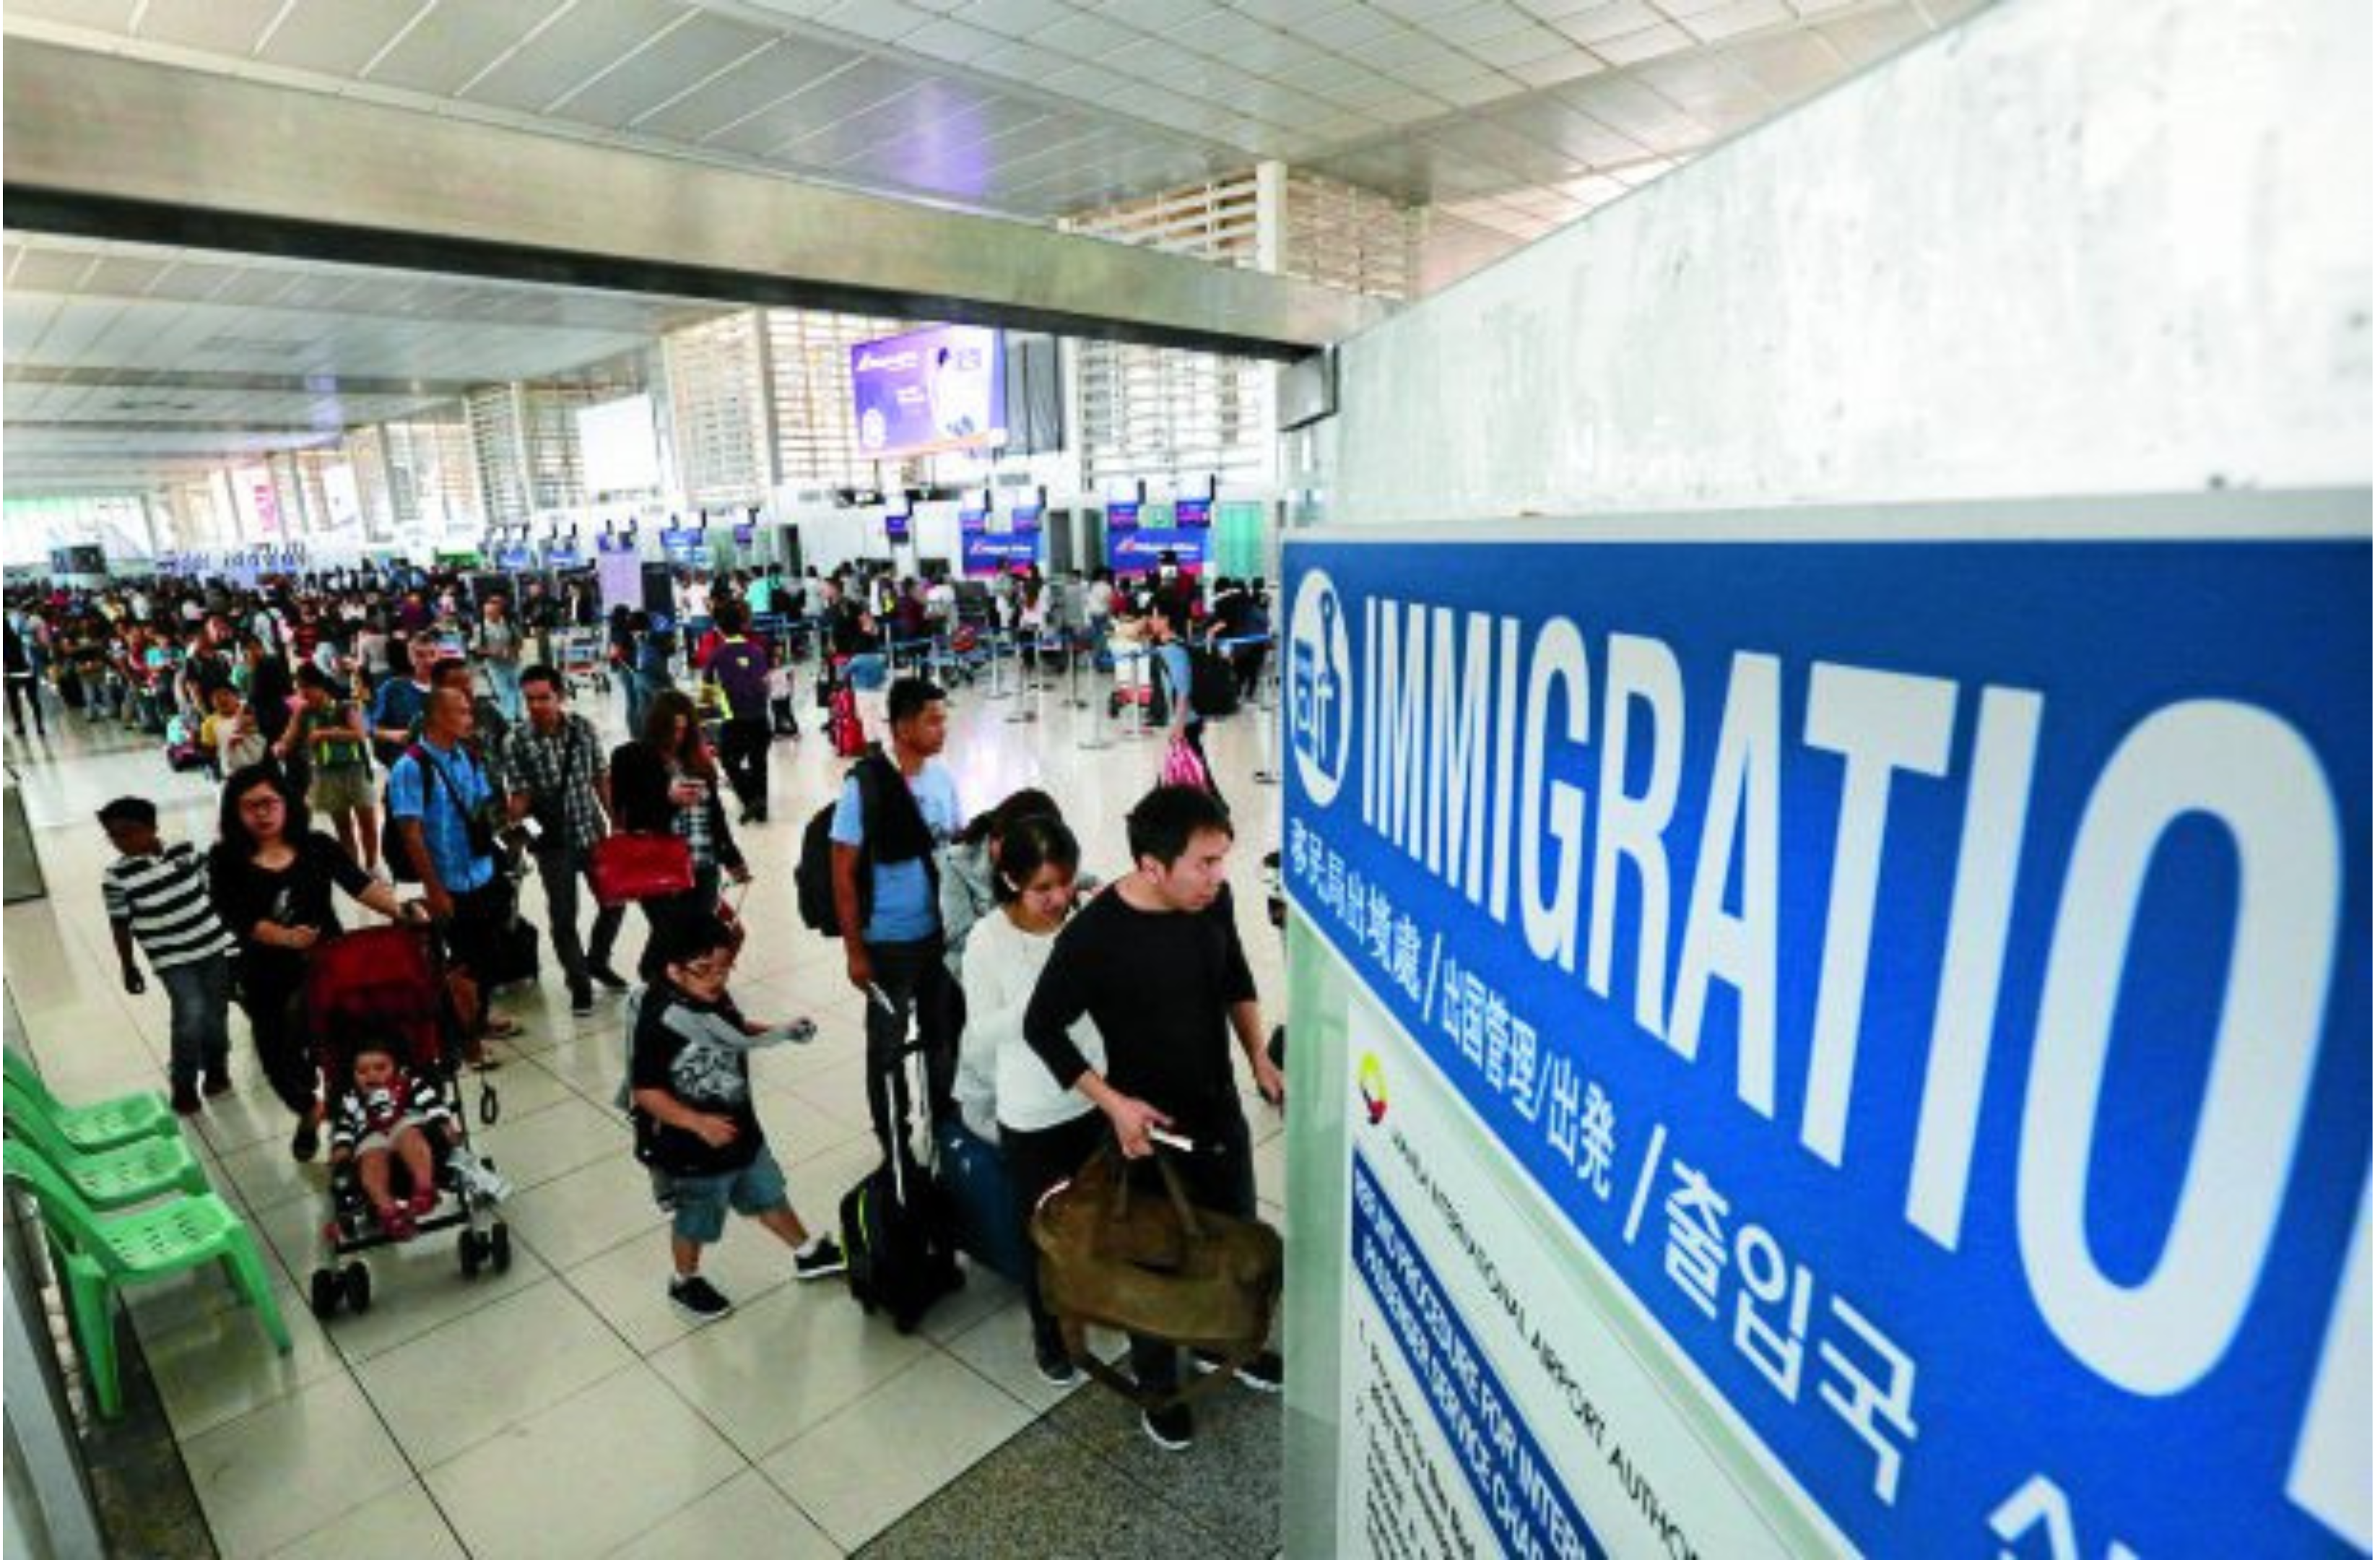 The Bureau of Immigration (BI) said on Friday that two foreign nationals were intercepted for entering the country to allegedly work illegally.